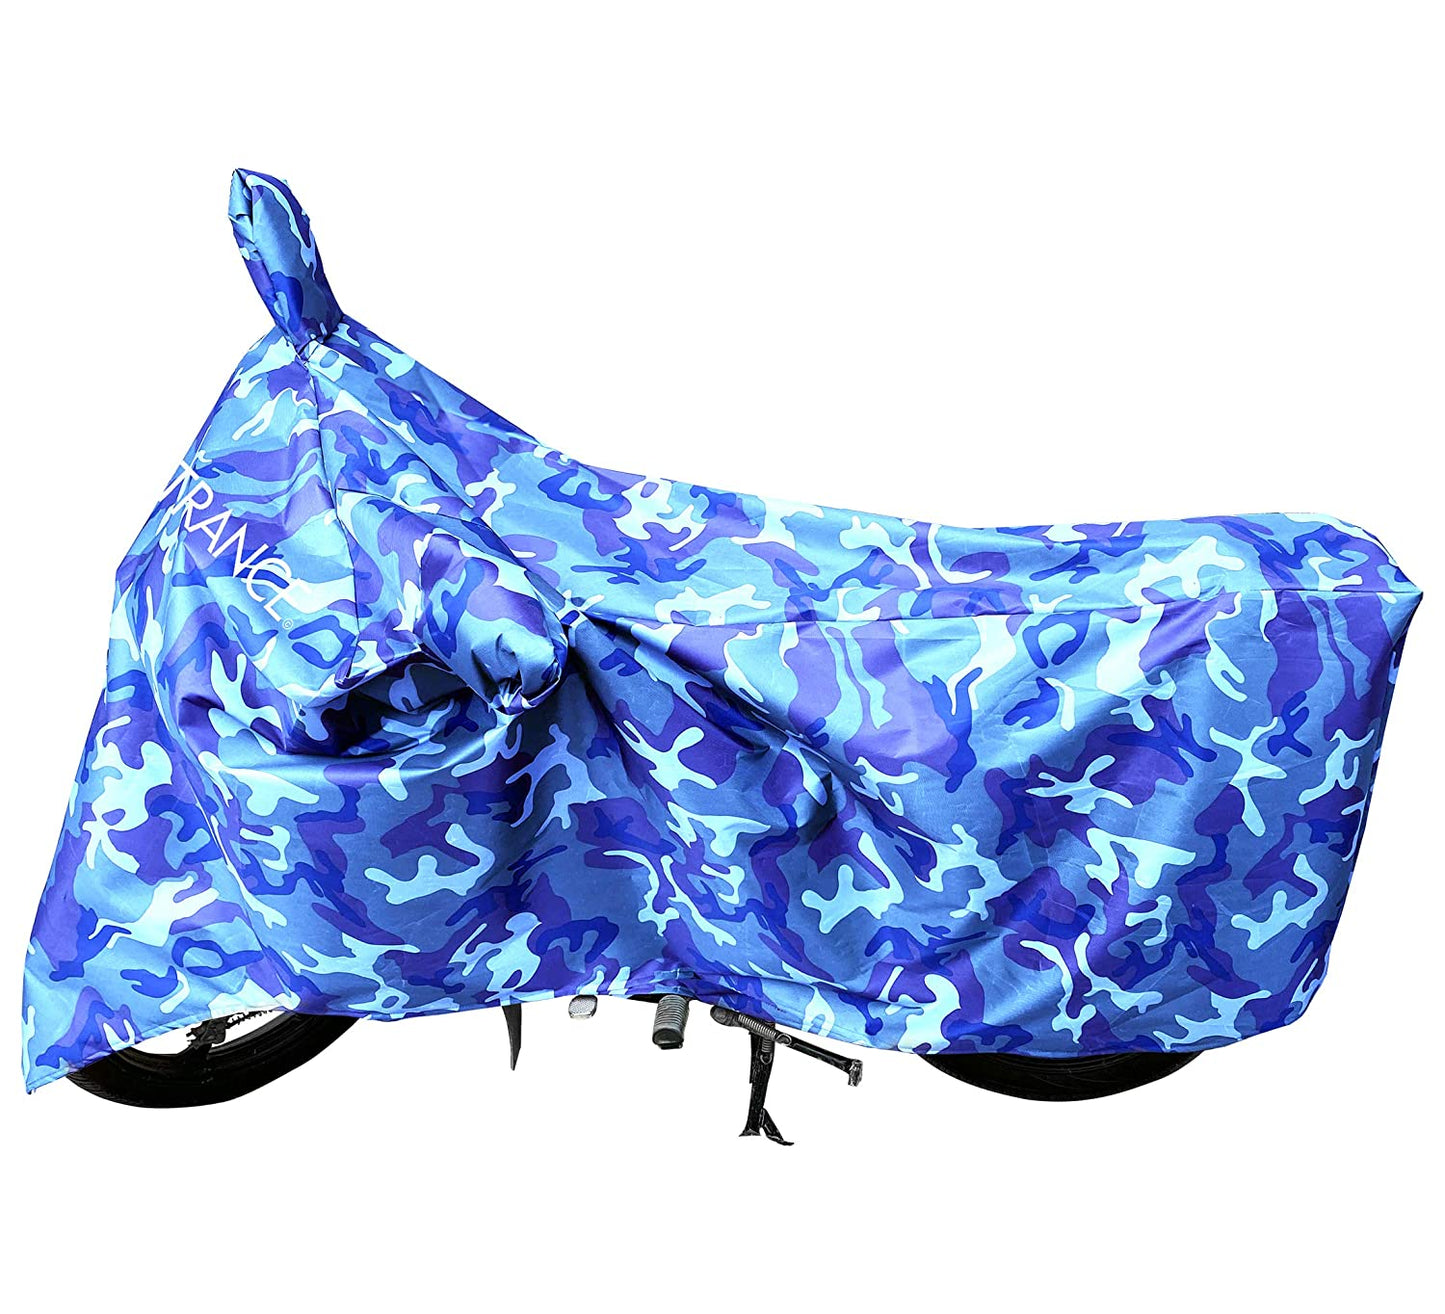 MotoTrance Jungle Bike Body Covers For Yamaha Gladiator RS - Interlock-Stitched Waterproof and Heat Resistant with Mirror Pockets